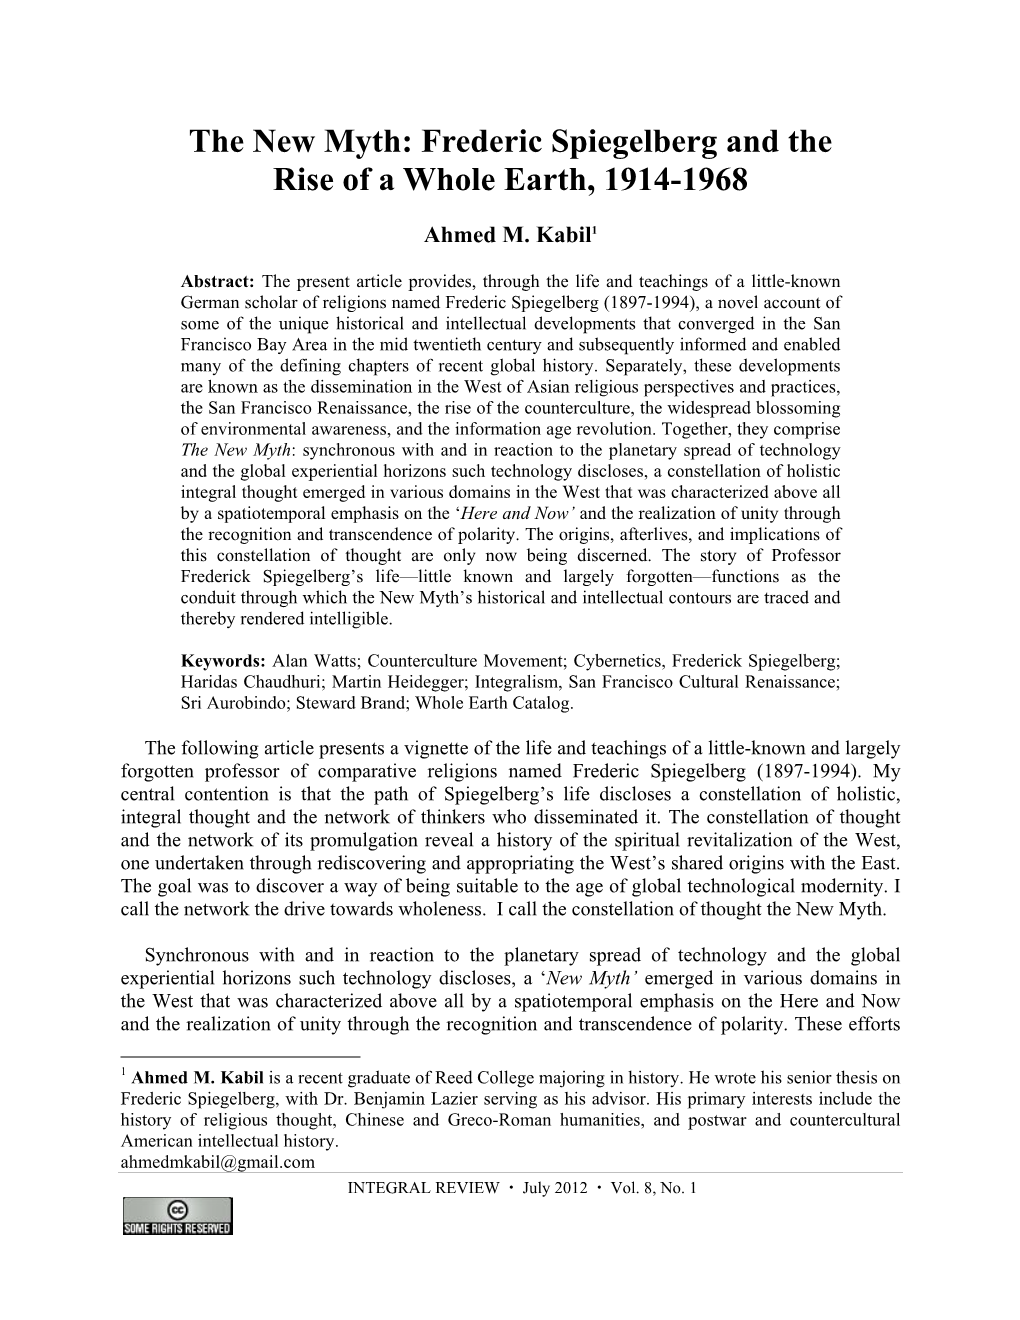 Frederic Spiegelberg and the Rise of a Whole Earth, 1914-1968